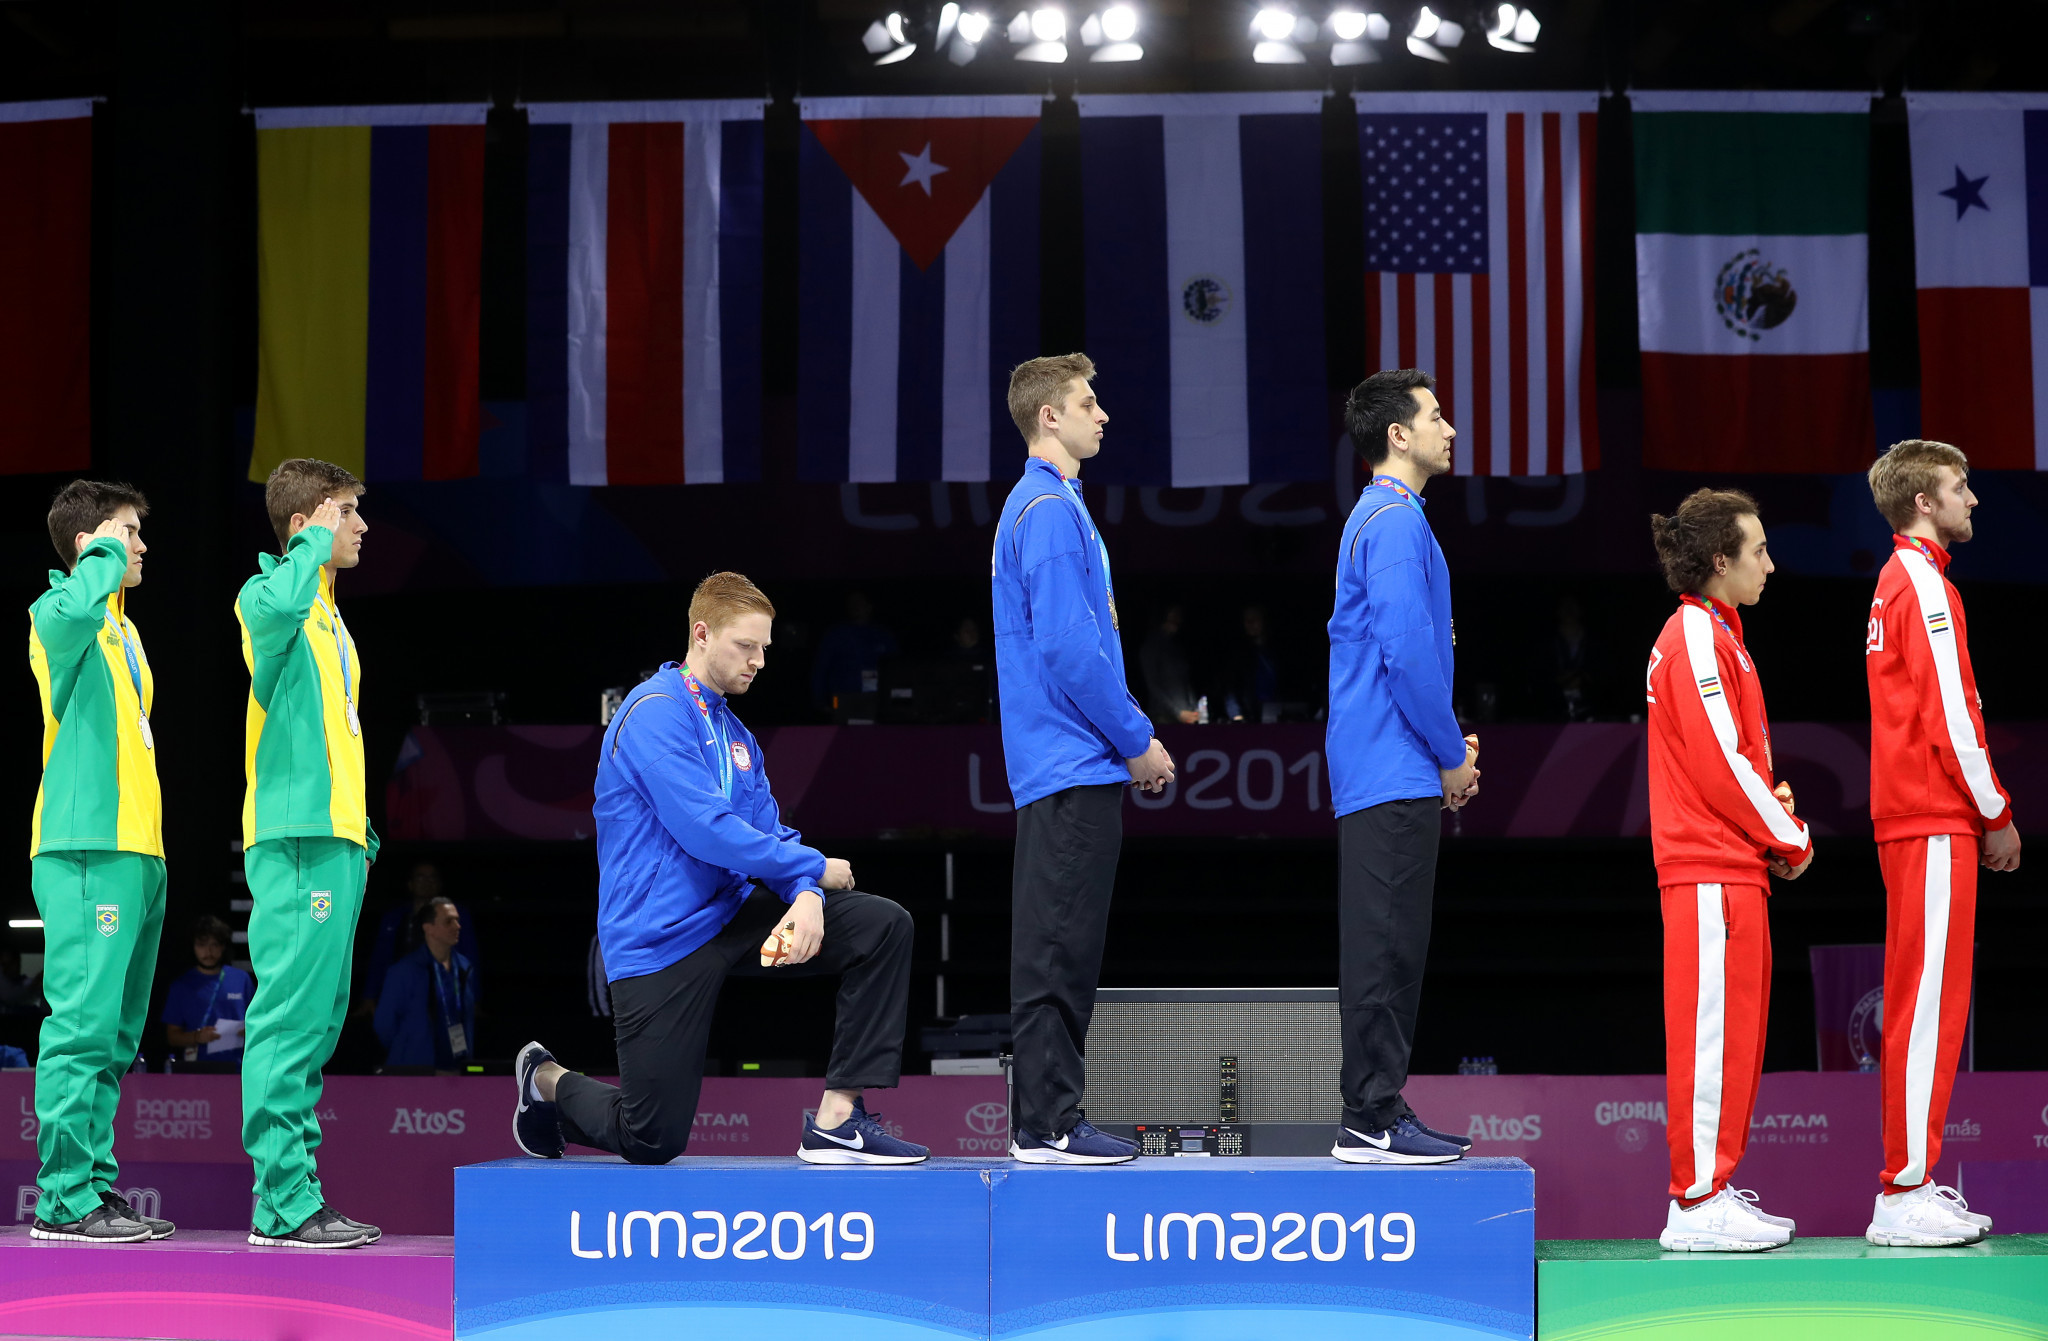 American fencer Race Imboden was reprimanded after taking a knee at the 2019 Pan American Games in Lima ©Getty Images